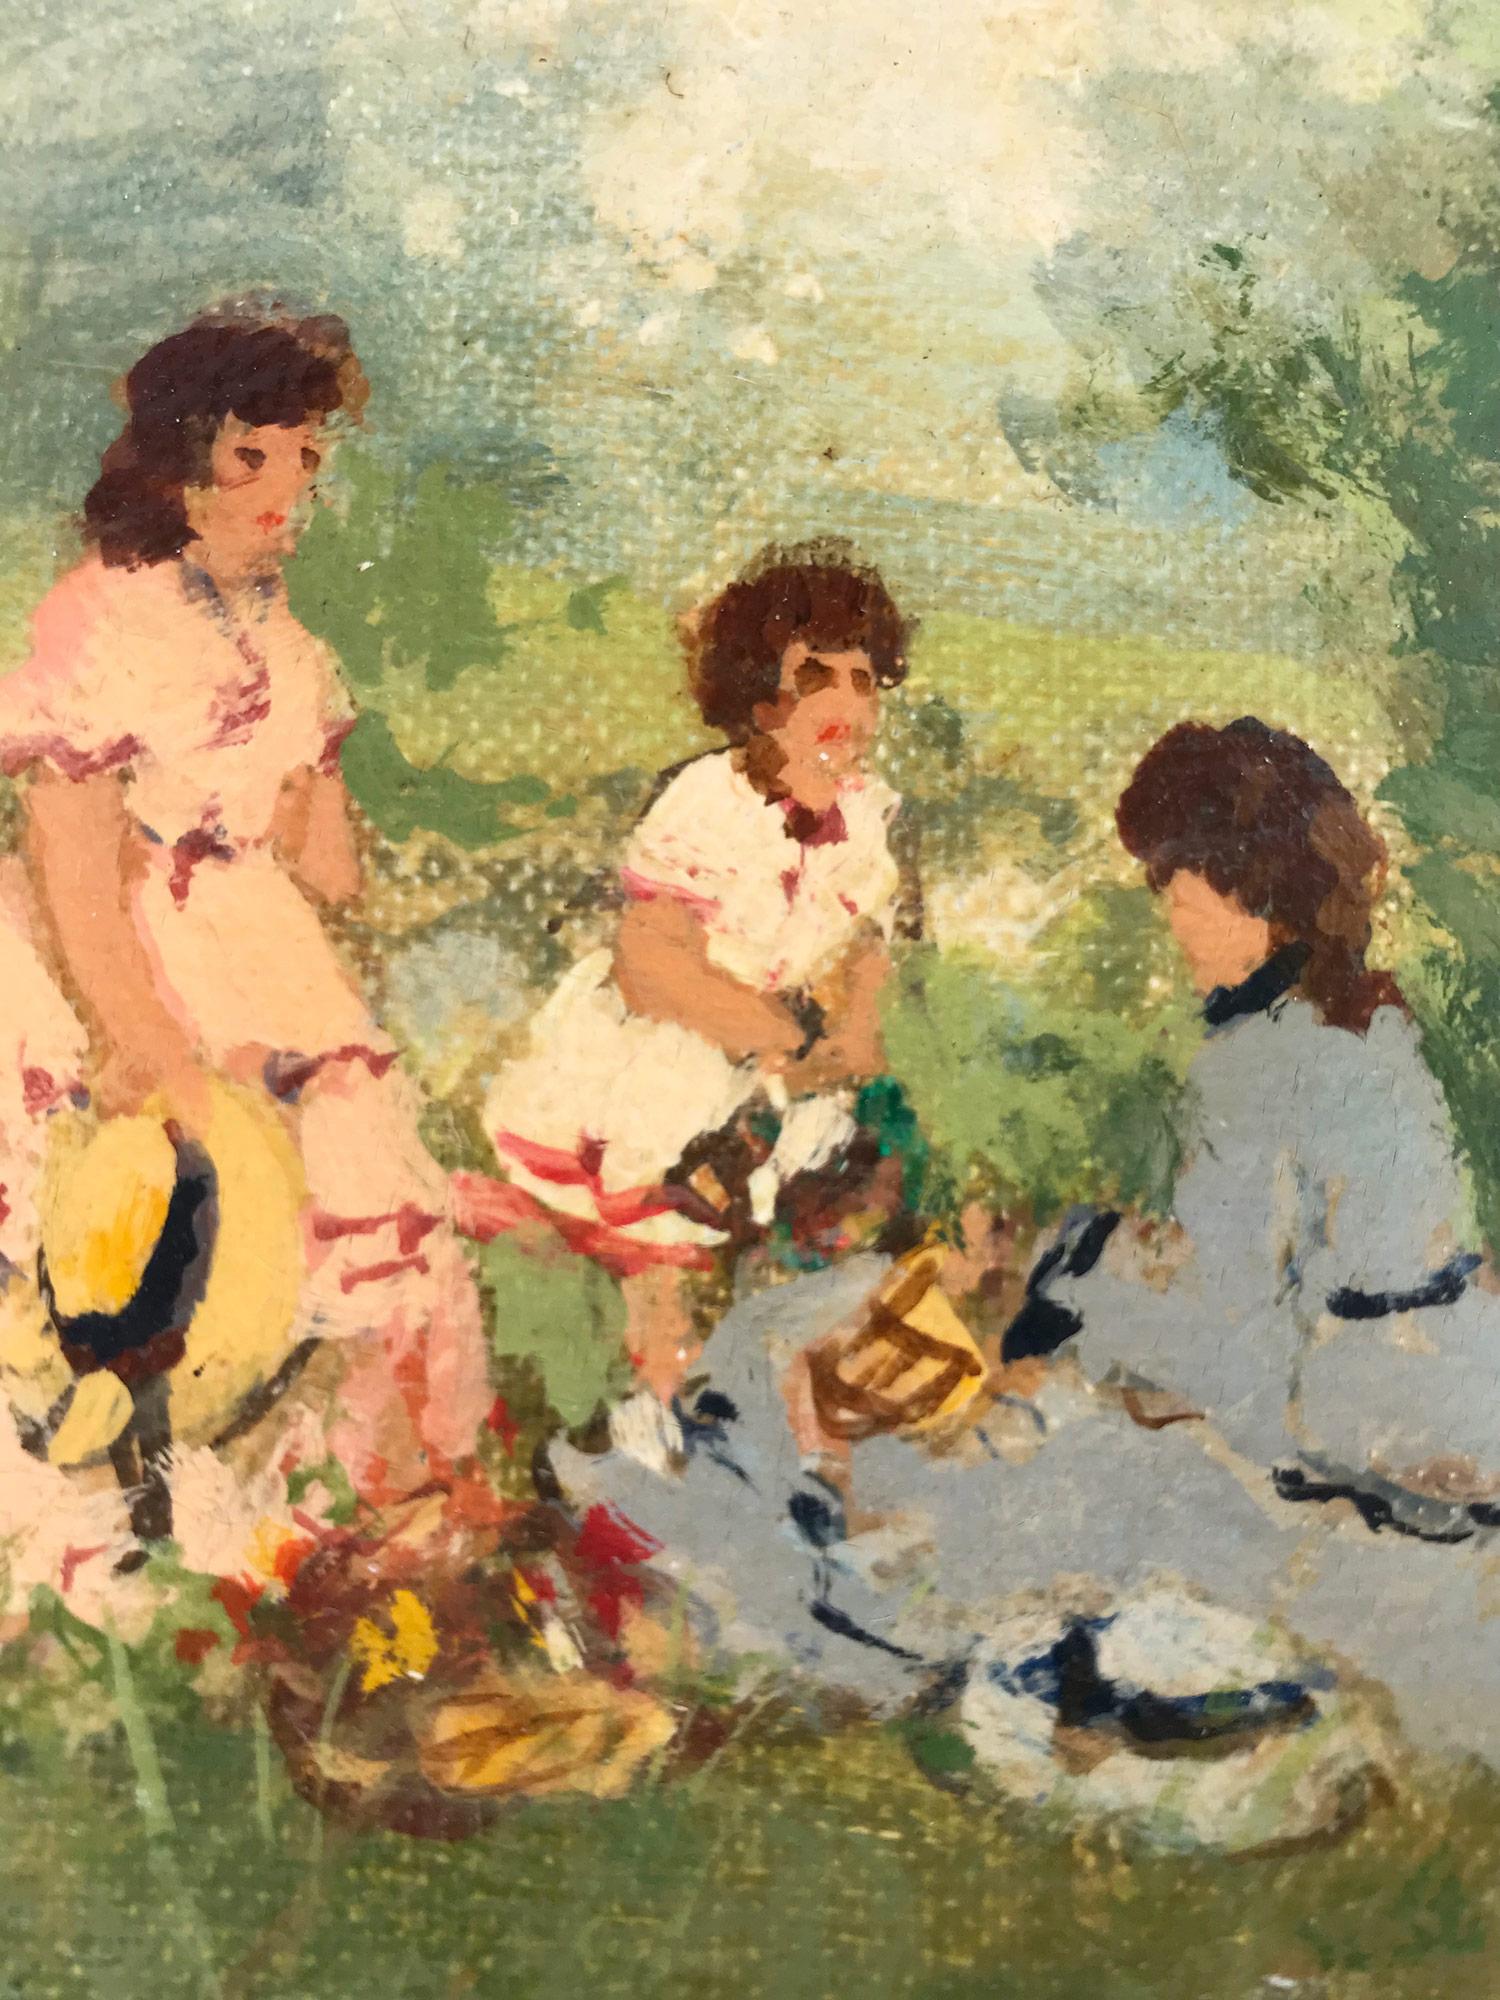 Picnic Scene in the Countryside - Impressionist Painting by Suzanne Demarest 